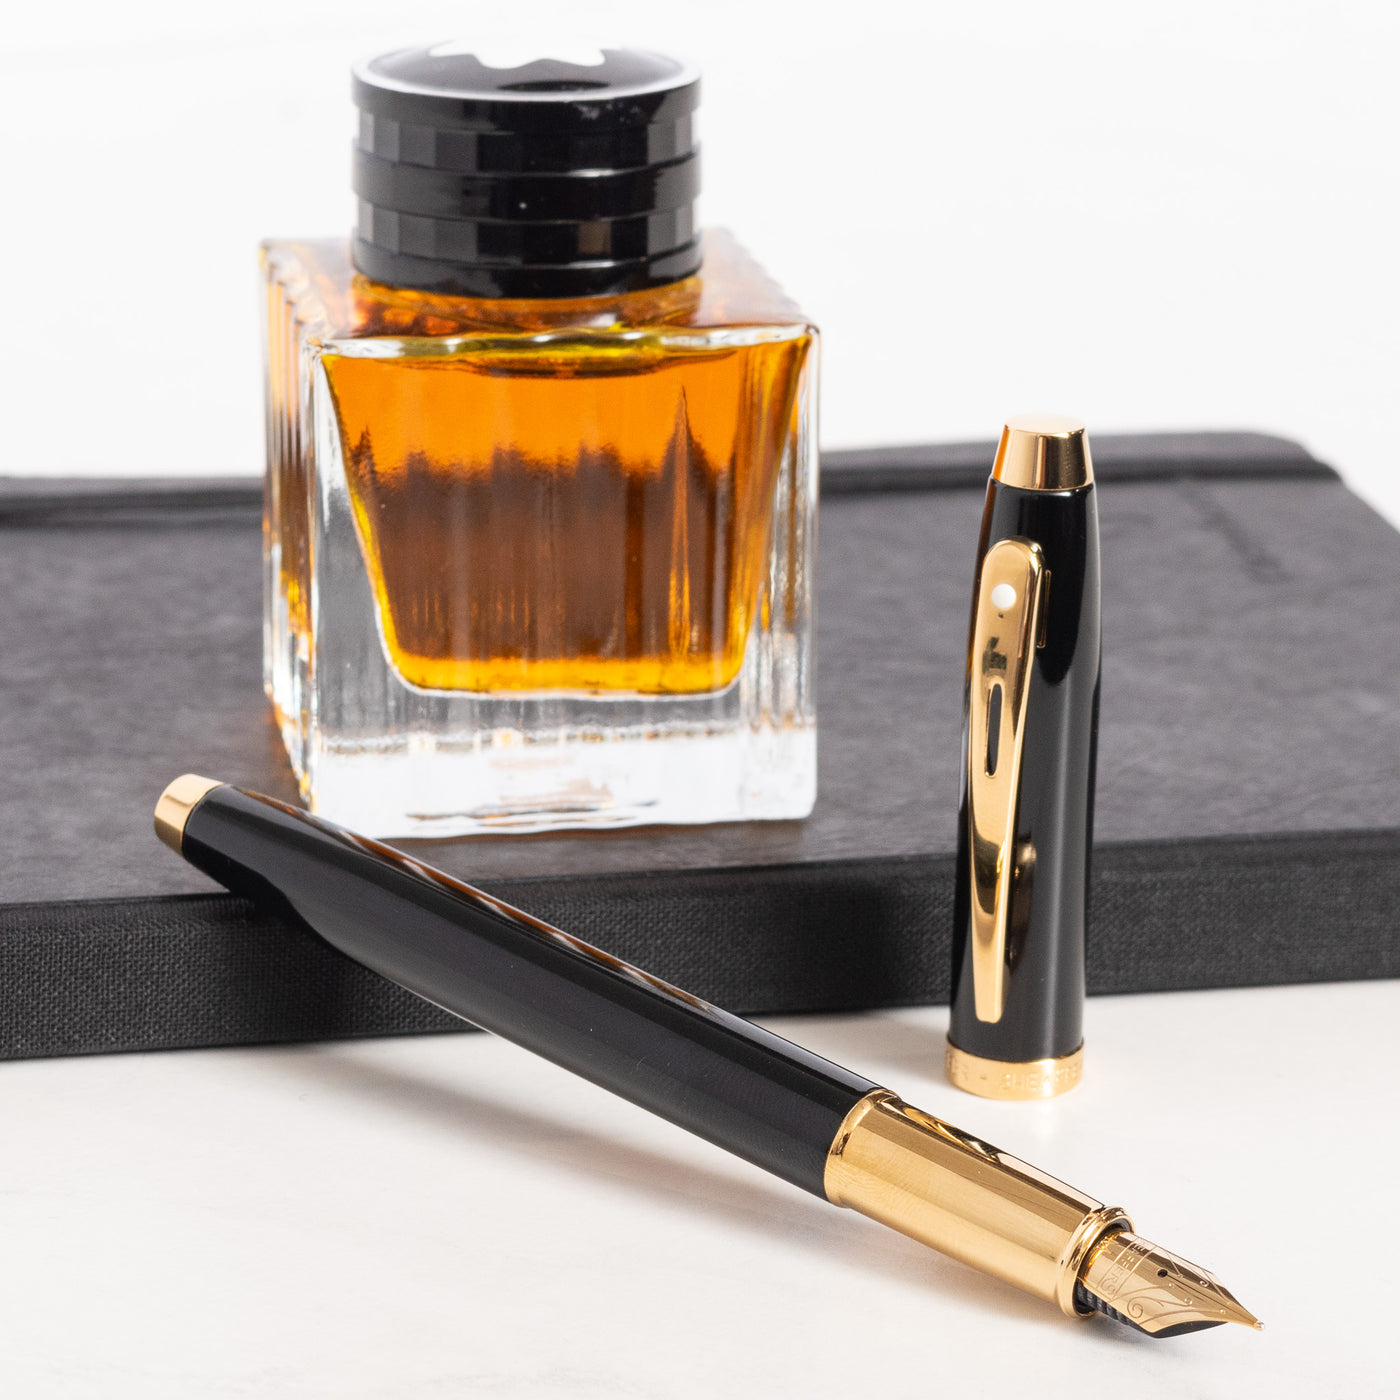 Sheaffer 100 Fountain Pen - Black with Gold Trim uncapped